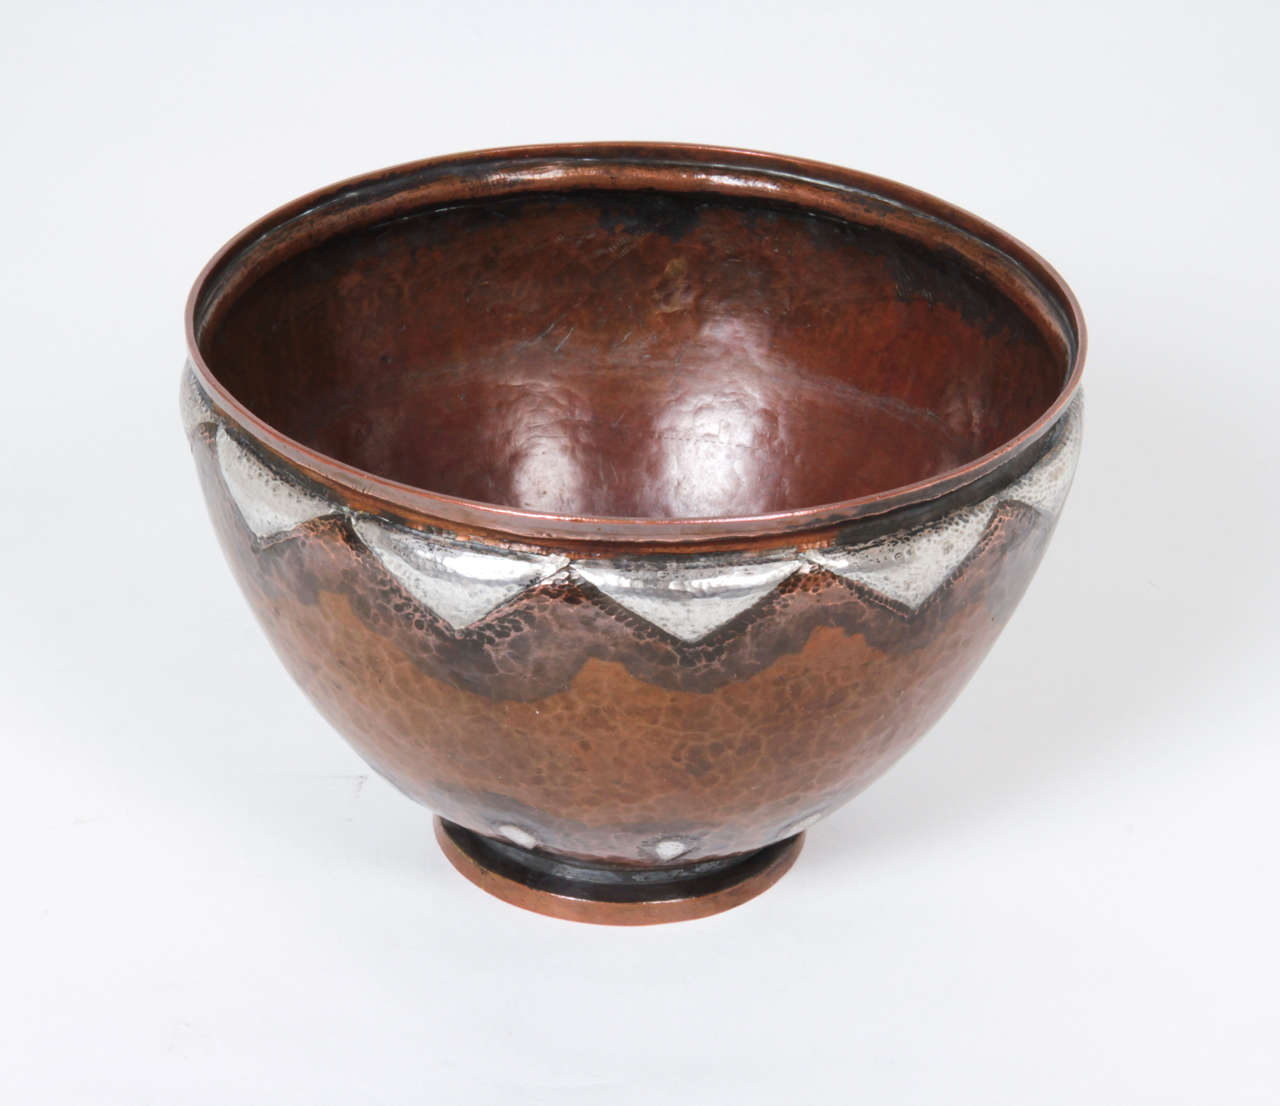 Jean Serrrière  (1893-1968)  France
A. Hebrard  (closed 1937) Paris

Footed dinanderie bowl, circa 1925

Hand wrought copper with silver incrustations in a repeating triangular motif and contrasting black patination on a rich brown